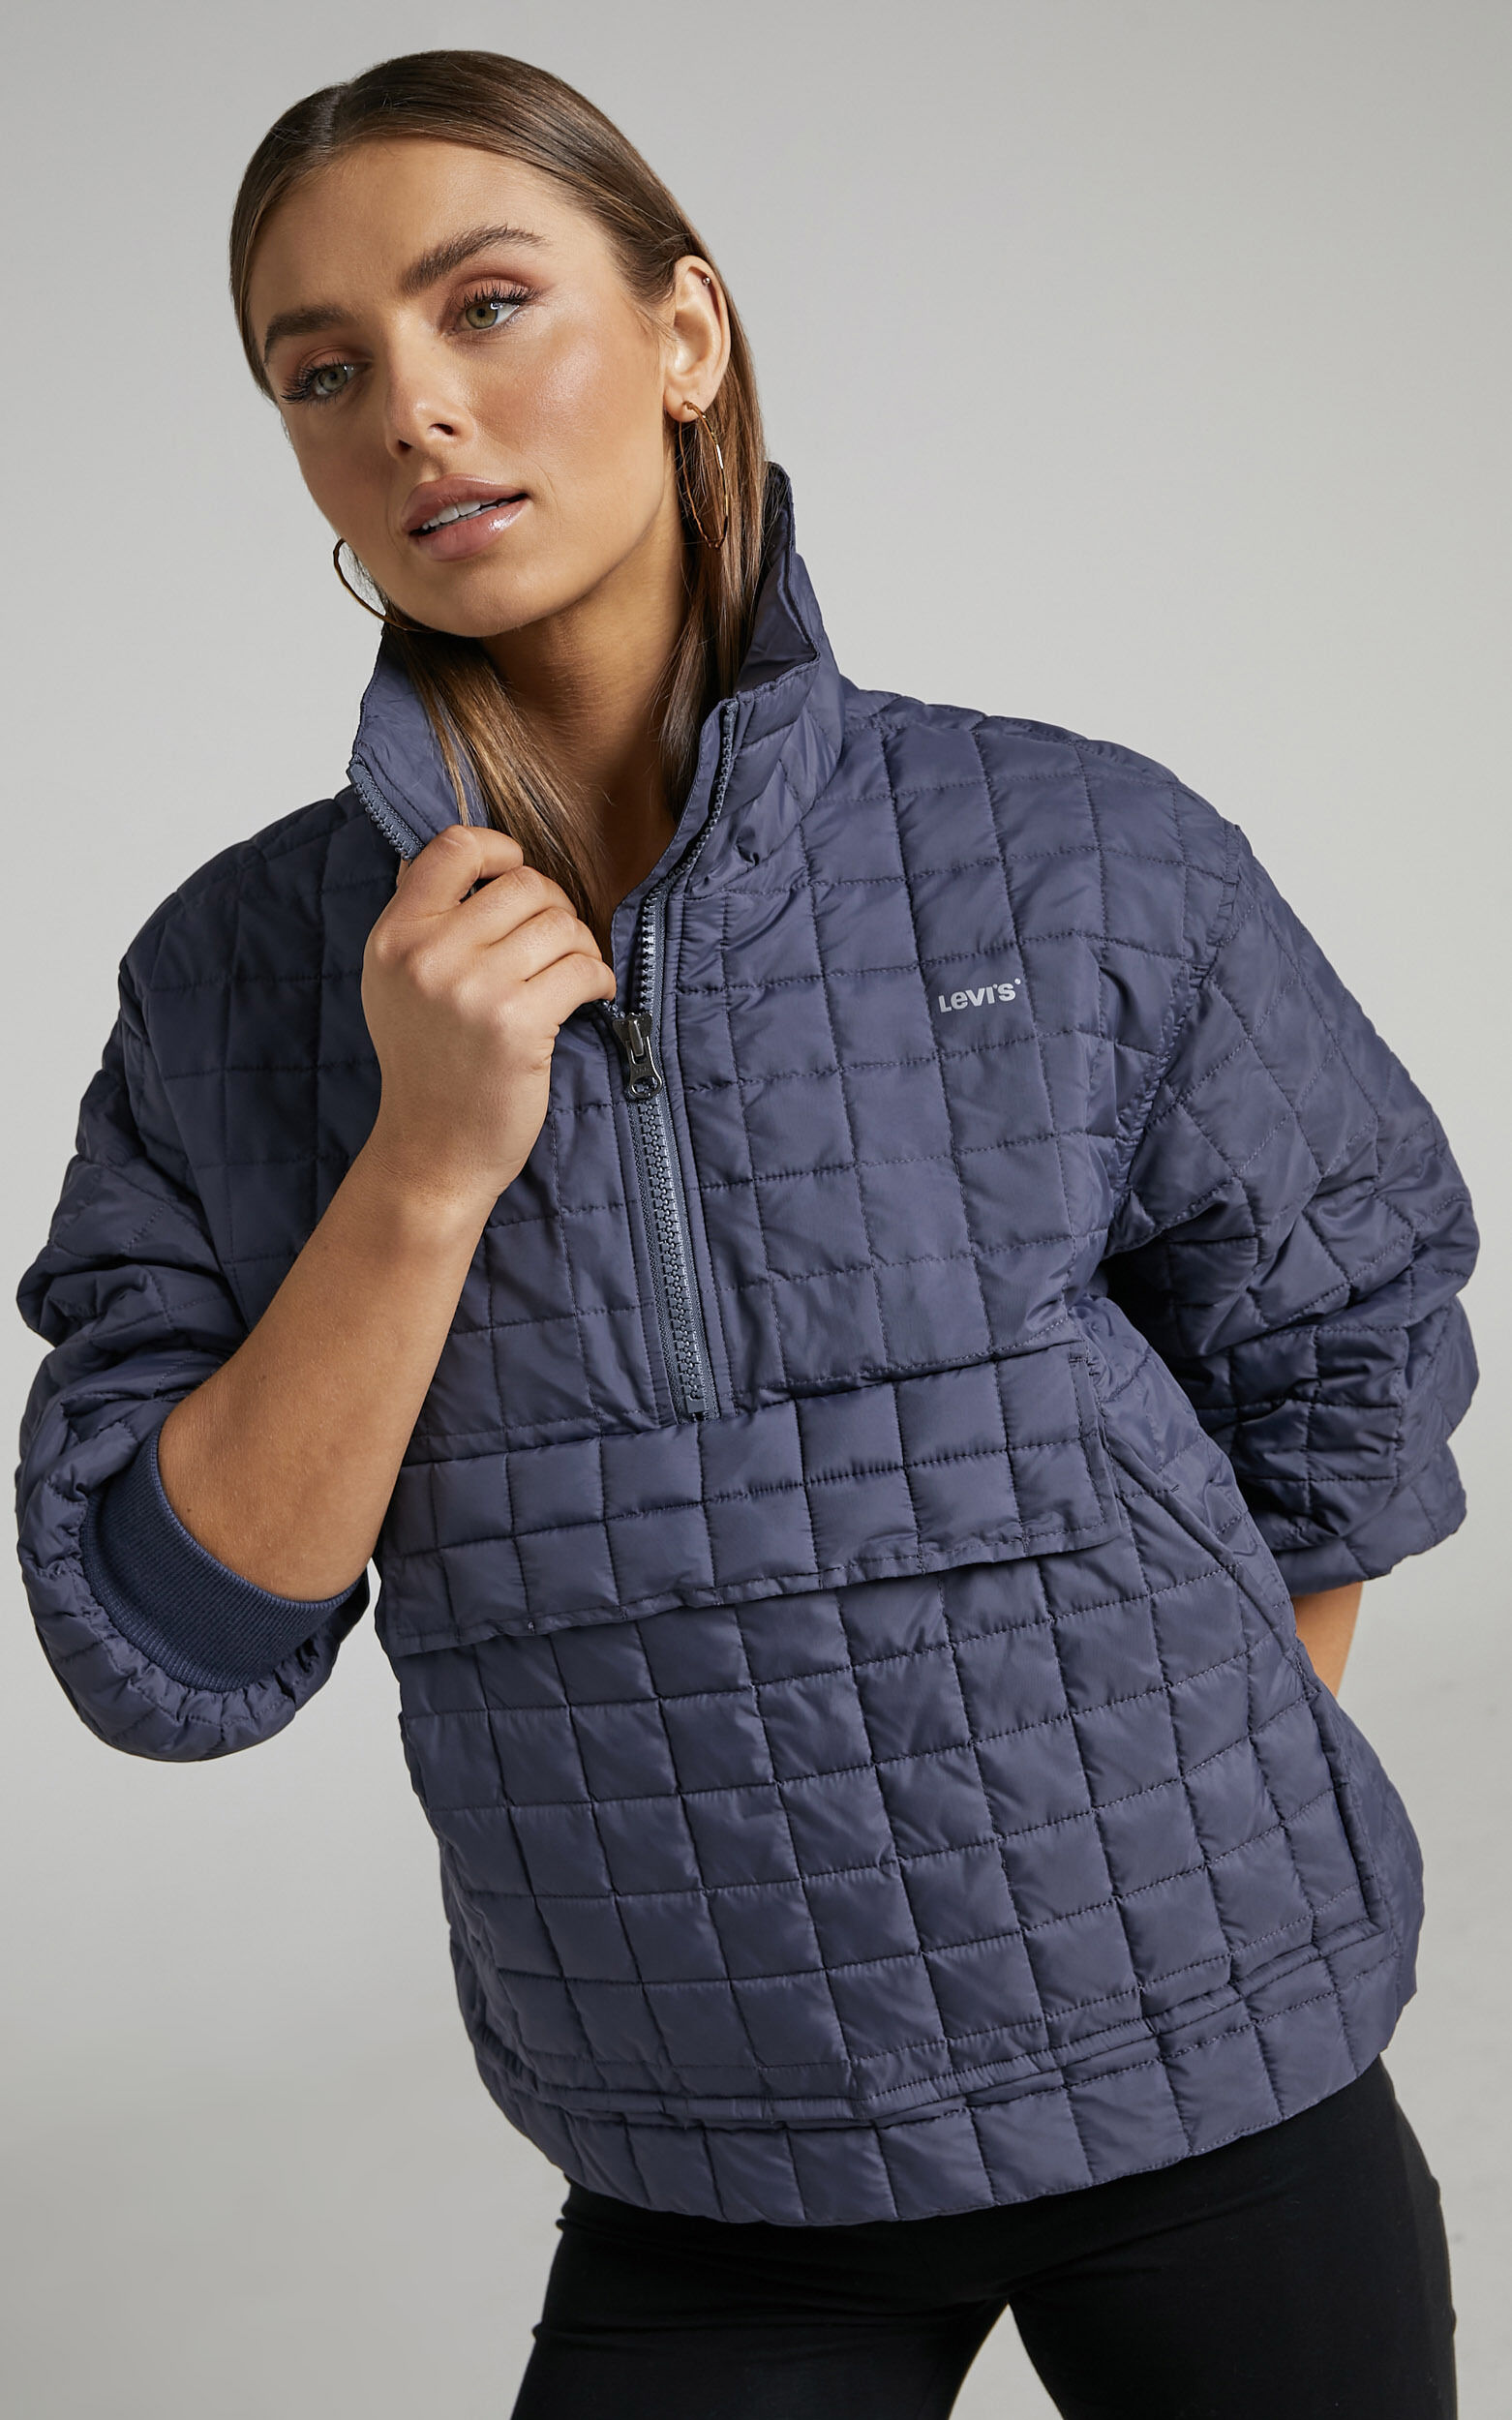 Levi's - Sidel Quilted Jacket in Odessey Grey - L, GRY1, super-hi-res image number null